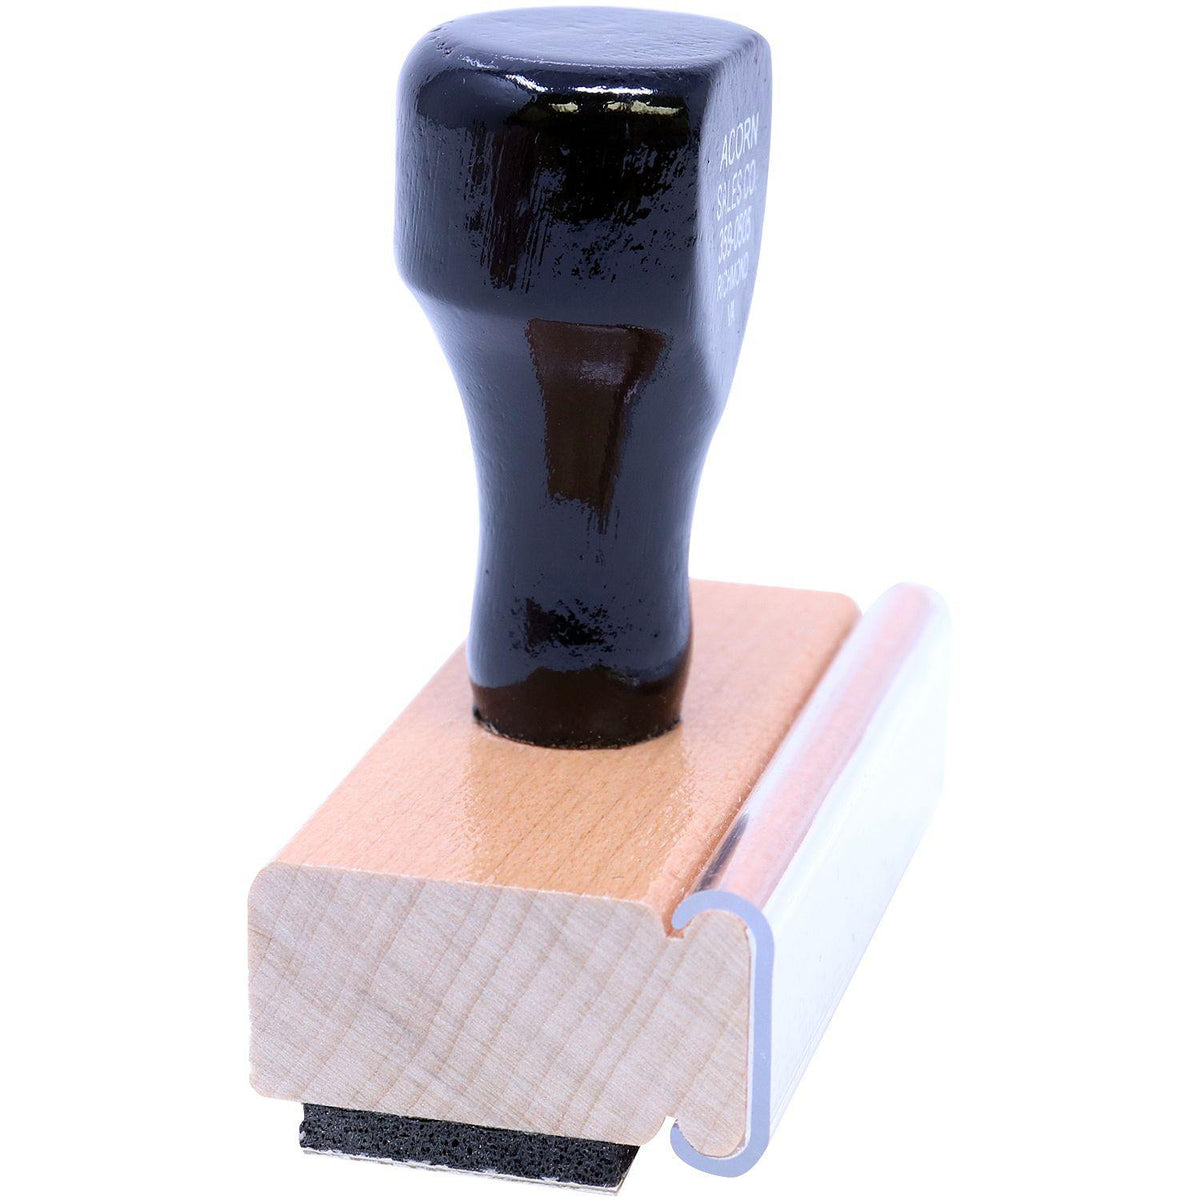 Side View of Large Return Receipt Requested Rubber Stamp at an Angle